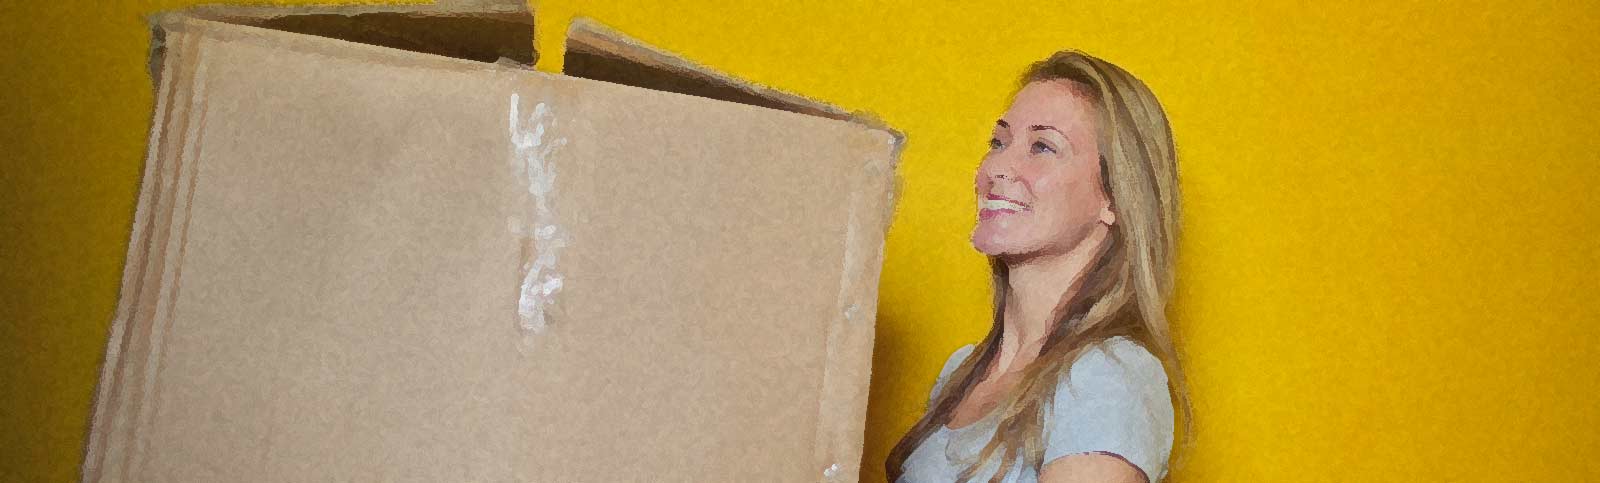 Moving Home: How to Pack Your Home